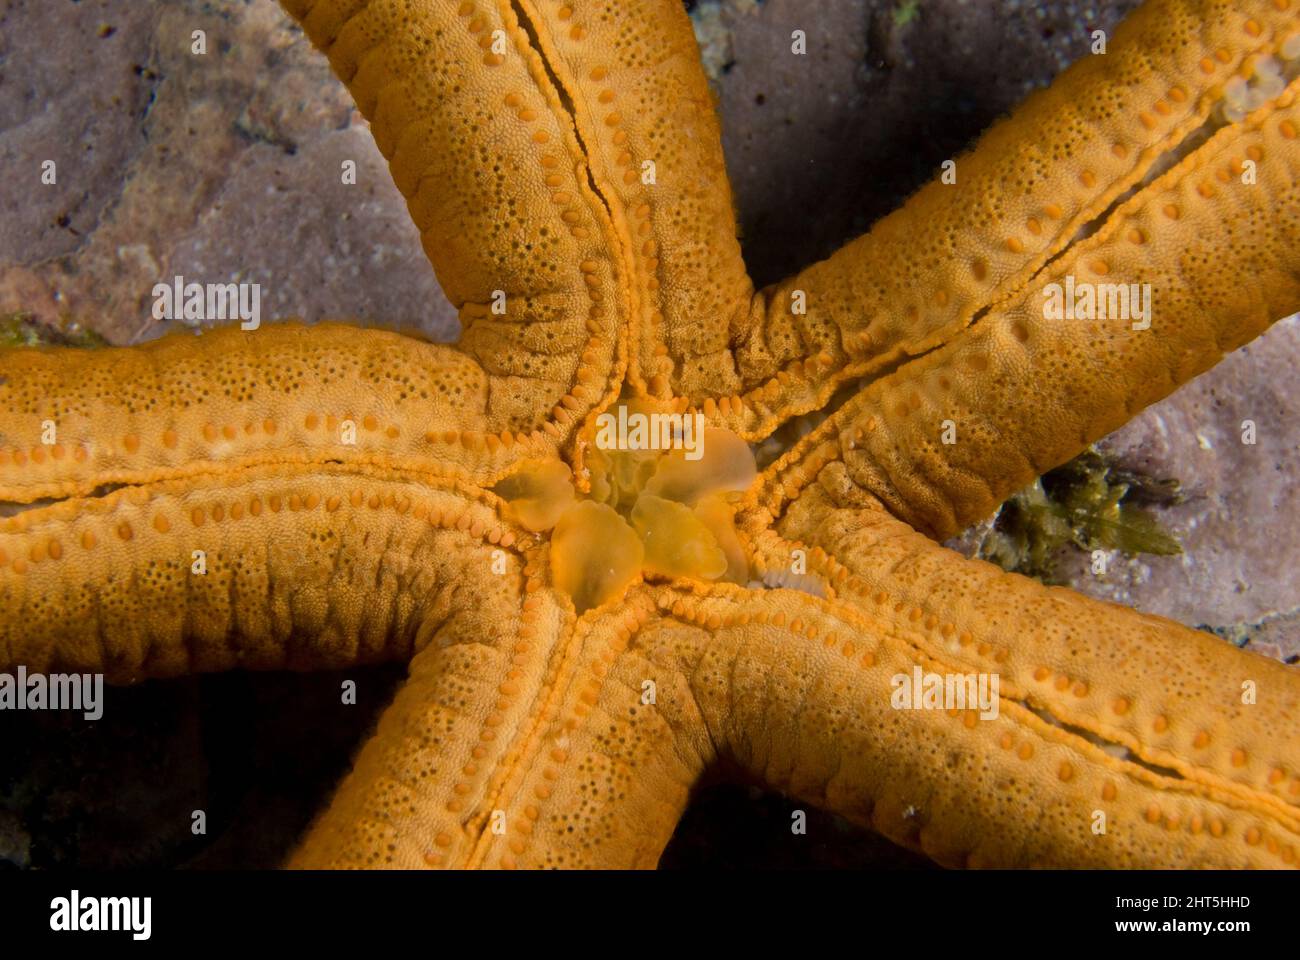 Seastar Ophidiaster confertus showing inverted stomach. Seastars eat by inverting their stomachs over their food and digesting it on the spot. The sto Stock Photo